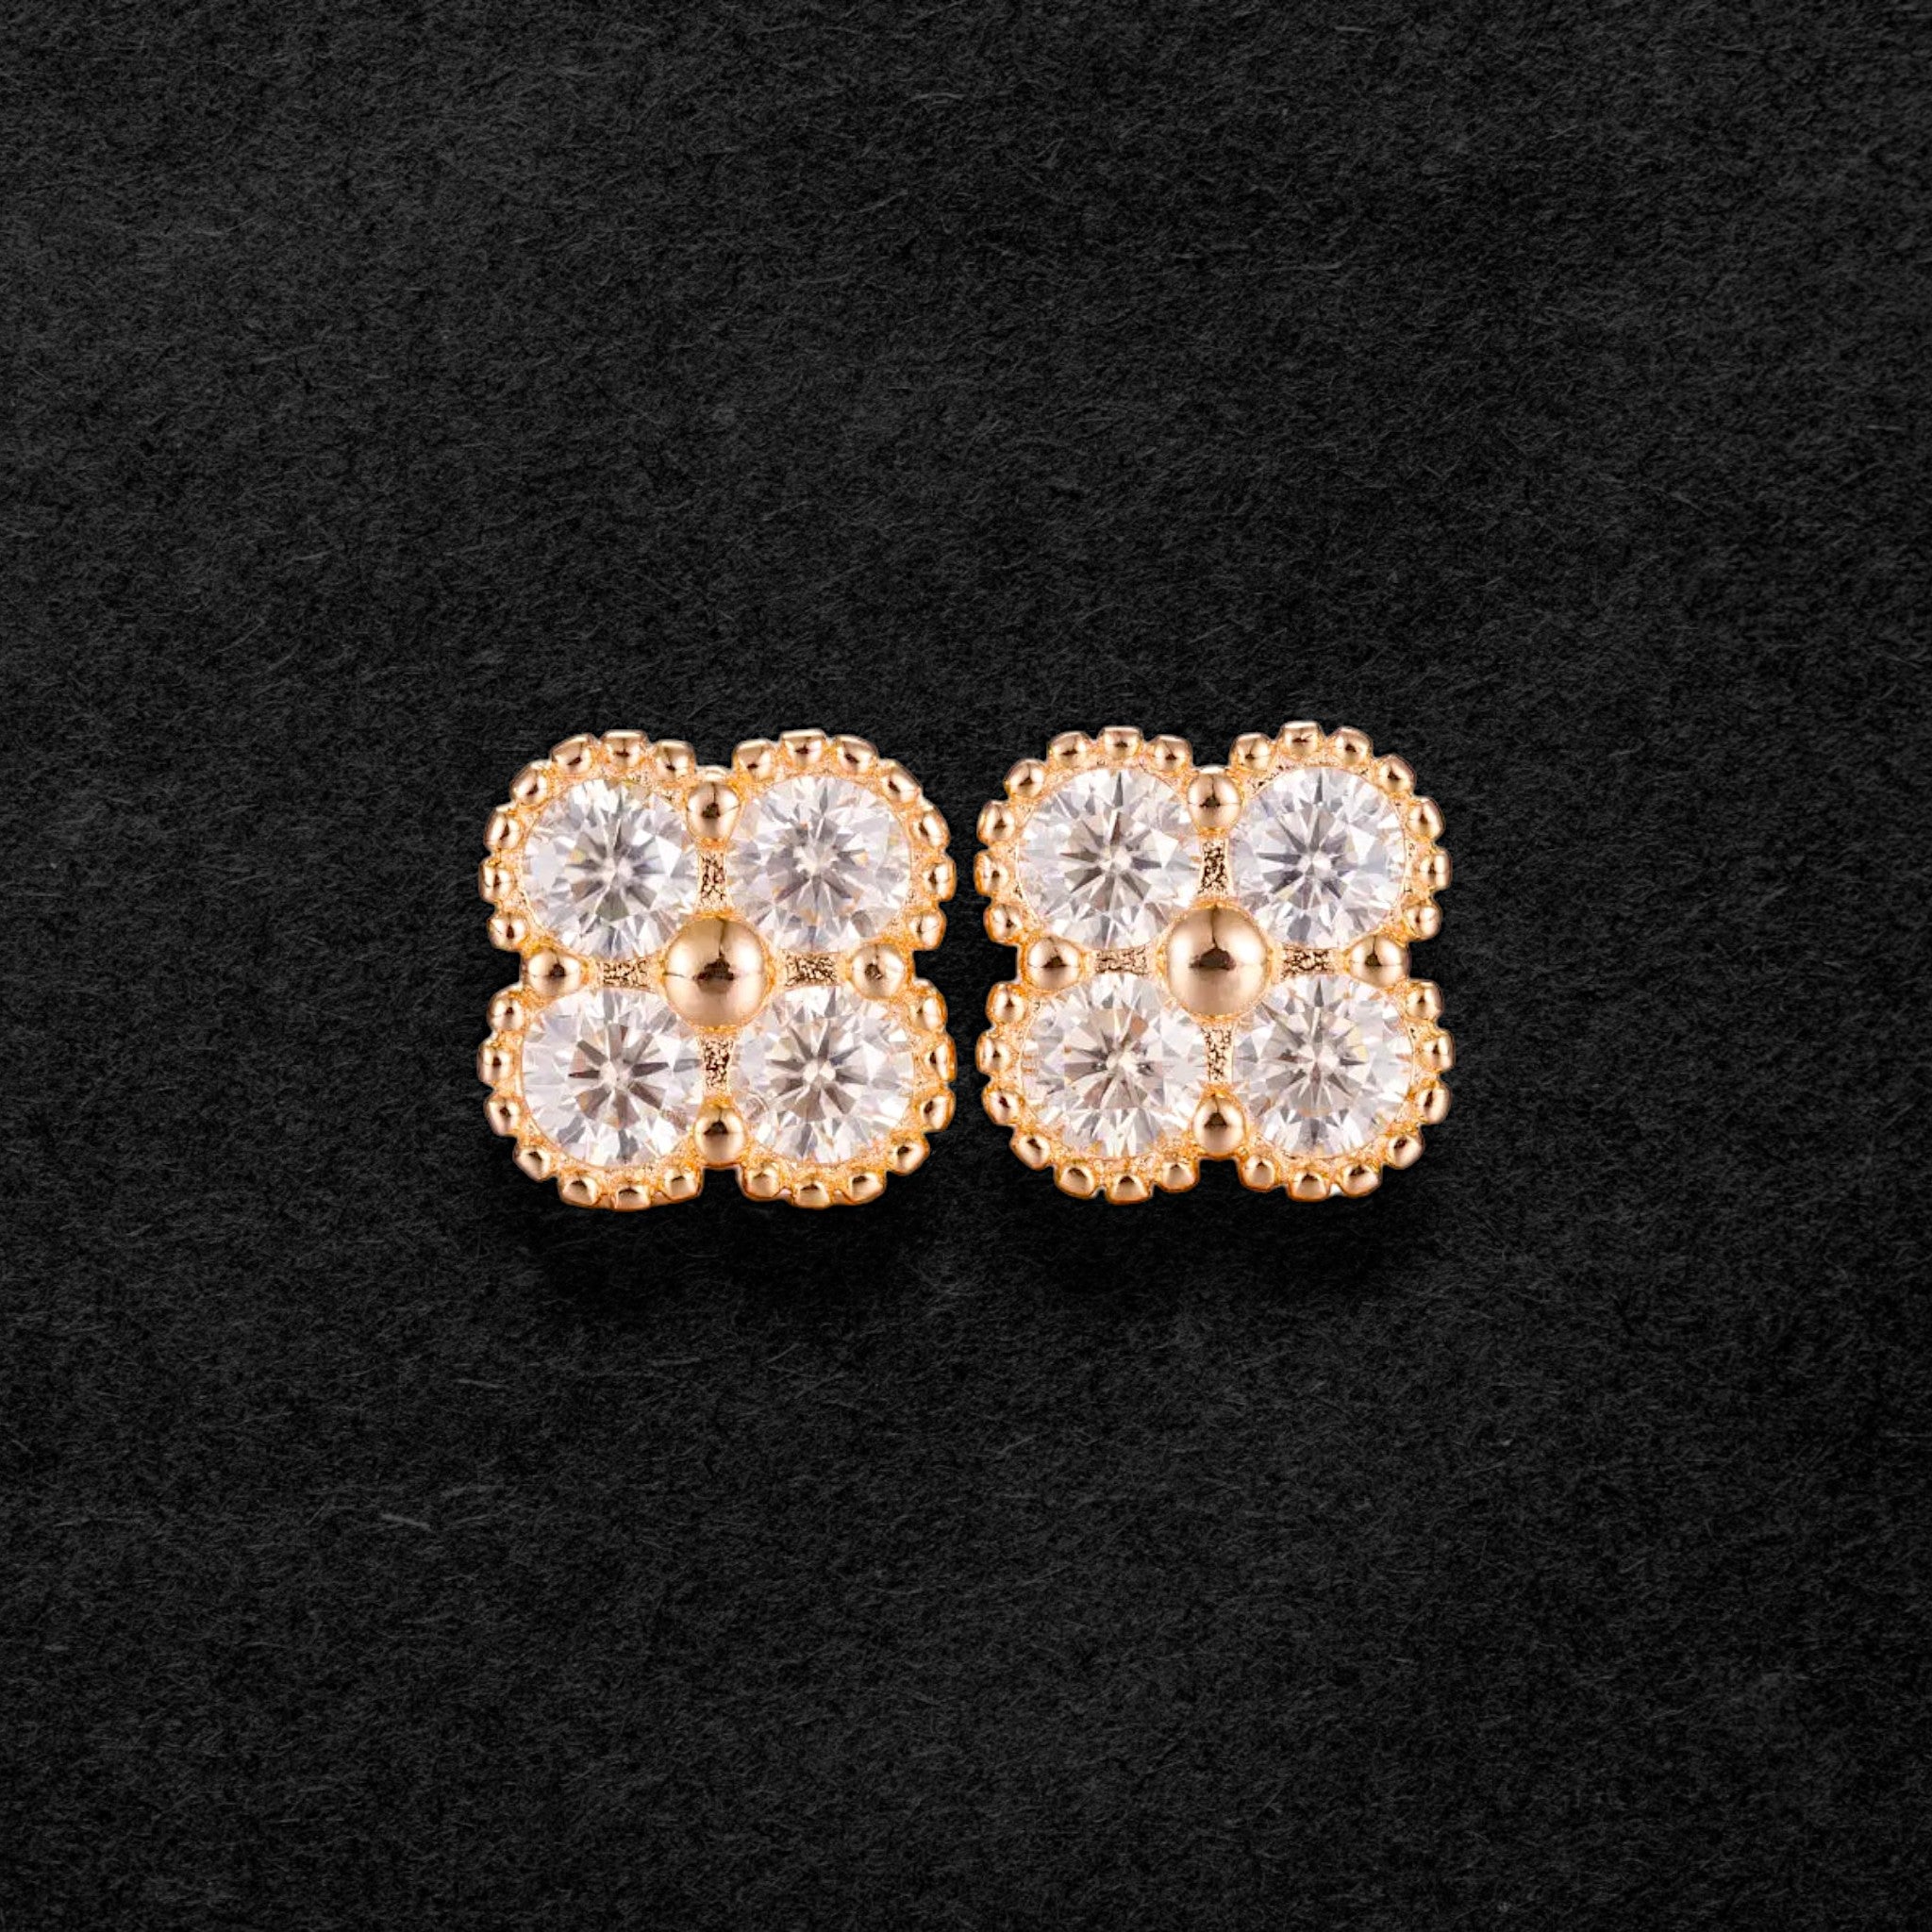 Exquisite Moissanite Floral Stud Earrings